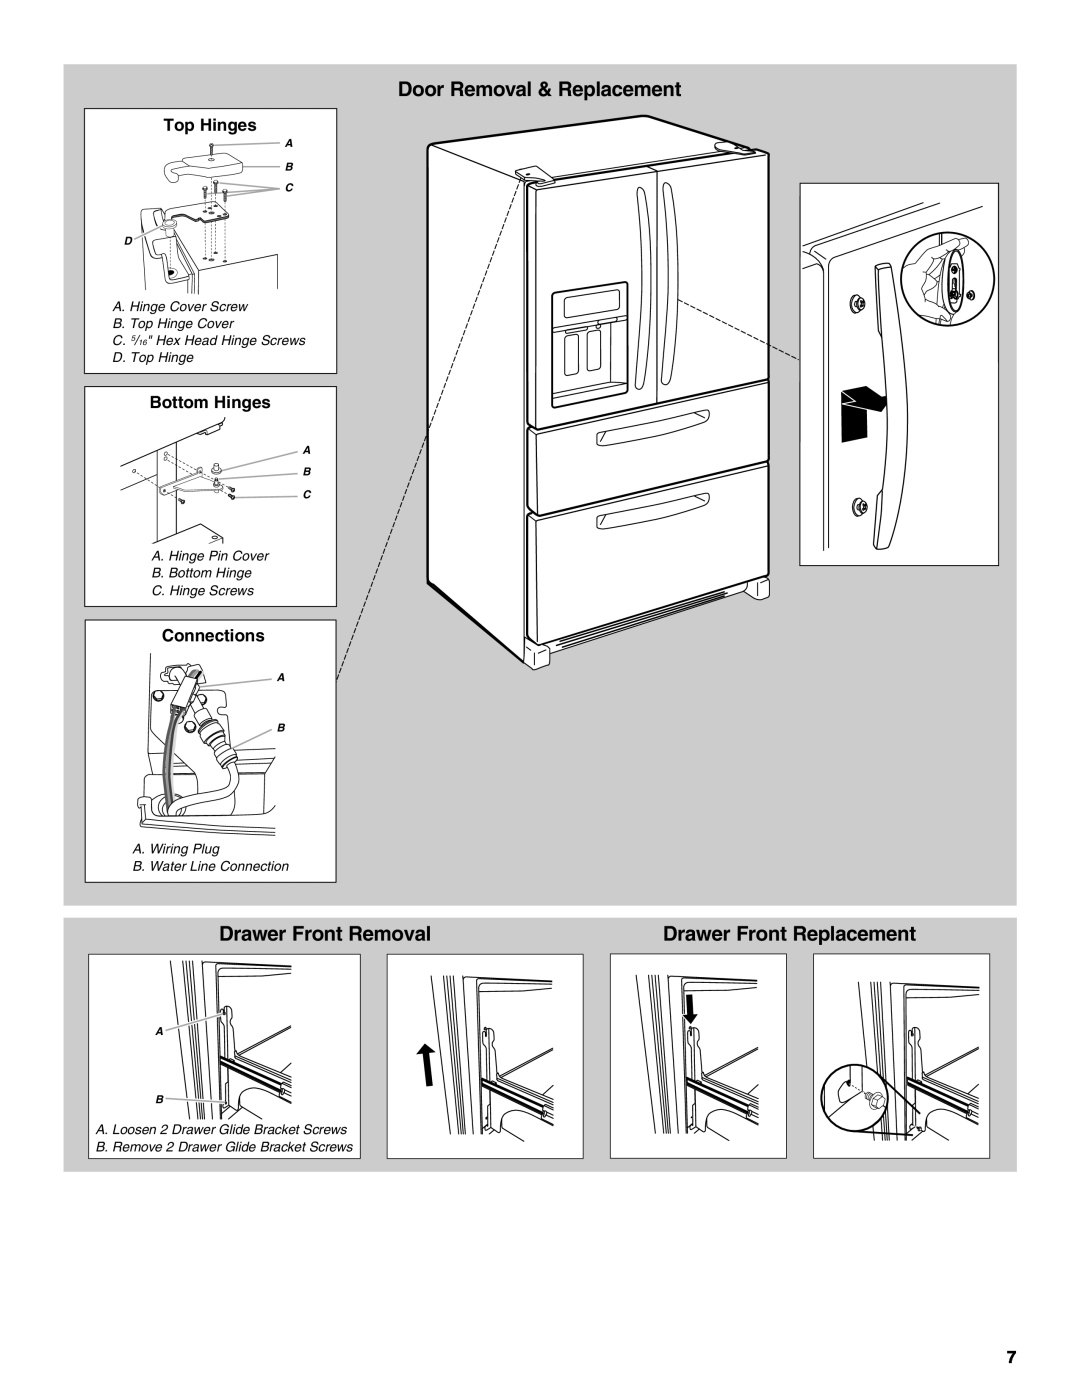 Maytag W10295064A Door Removal & Replacement, Drawer Front Removal, Drawer Front Replacement, Top Hinges, Bottom Hinges 